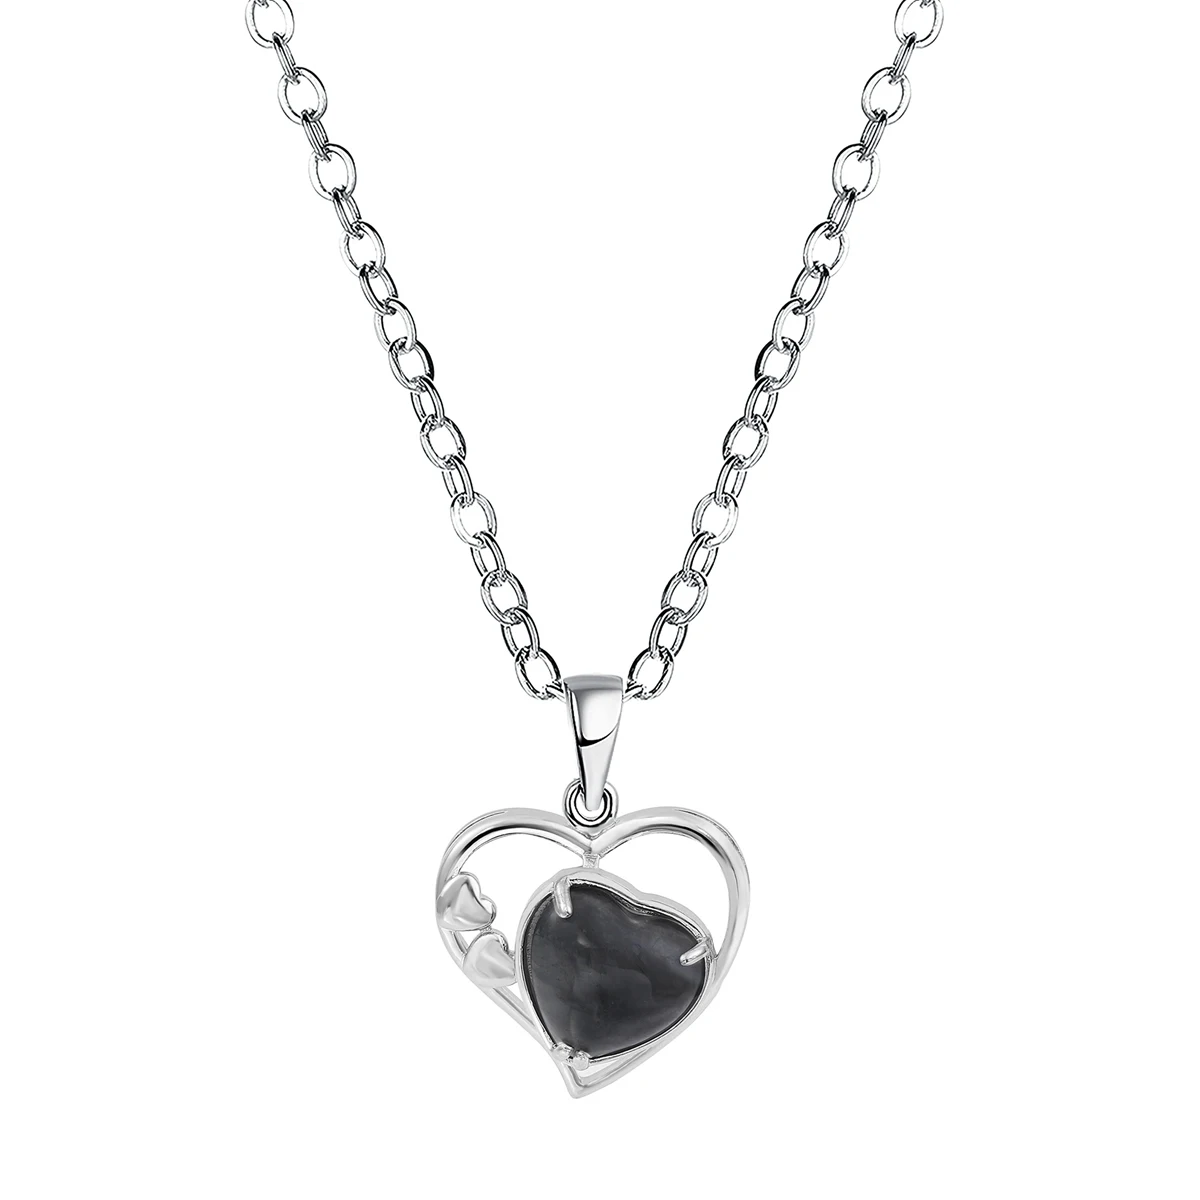 

JOYA GIFT Black Obsidian Love Heart Birthstone Necklaces for Women Forever Crystal Pendant Jewelry Valentine's Day